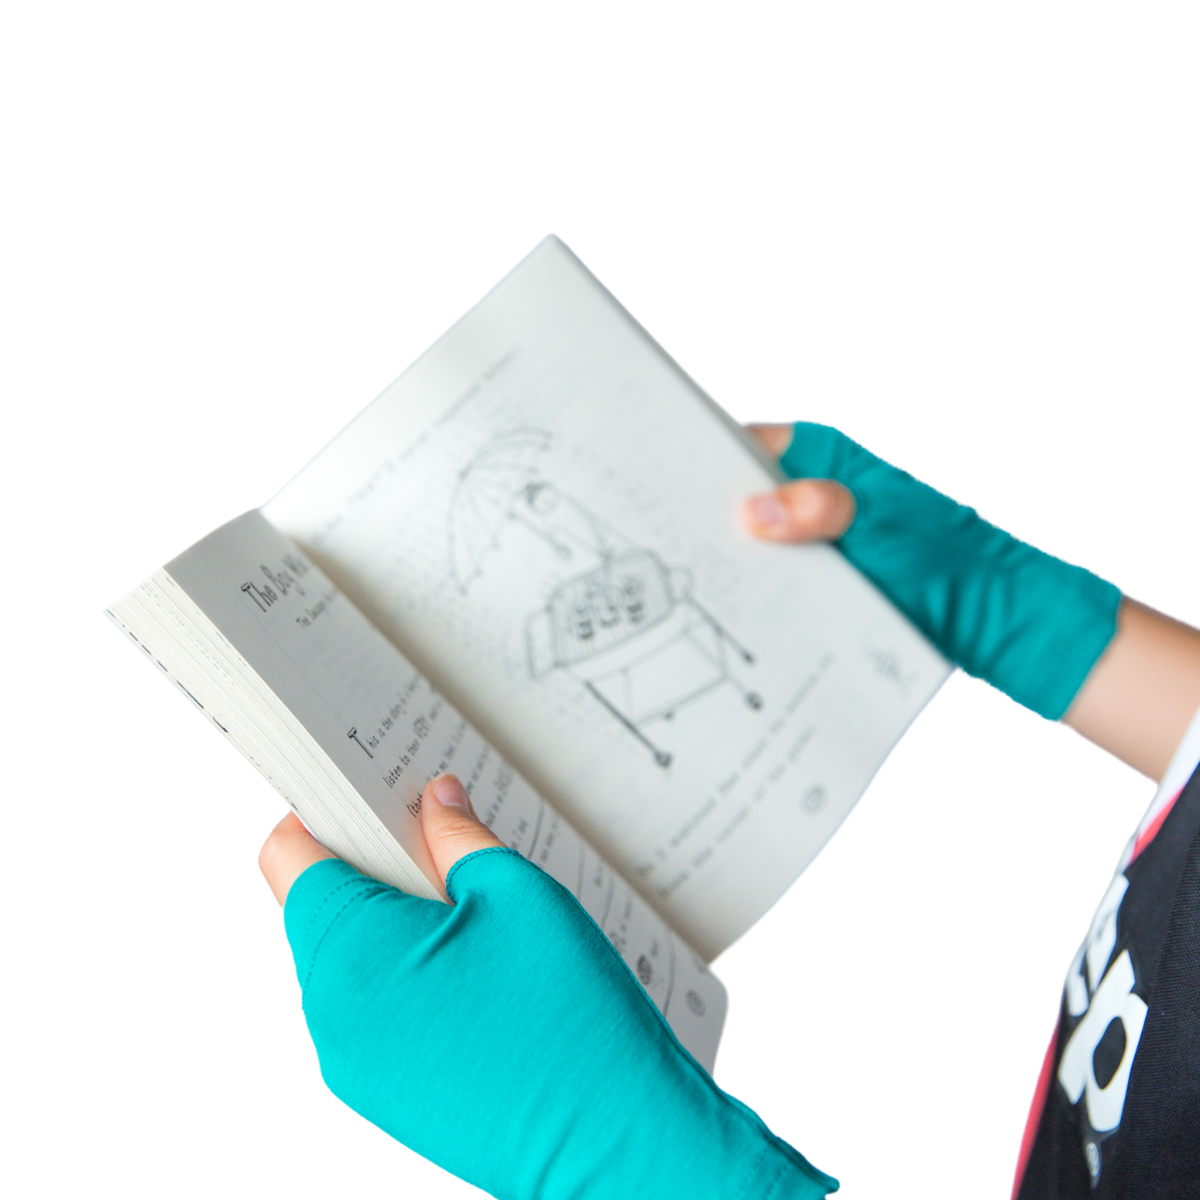 Child reading a book while wear teal Remedywear eczema gloves for toddlers and kids.